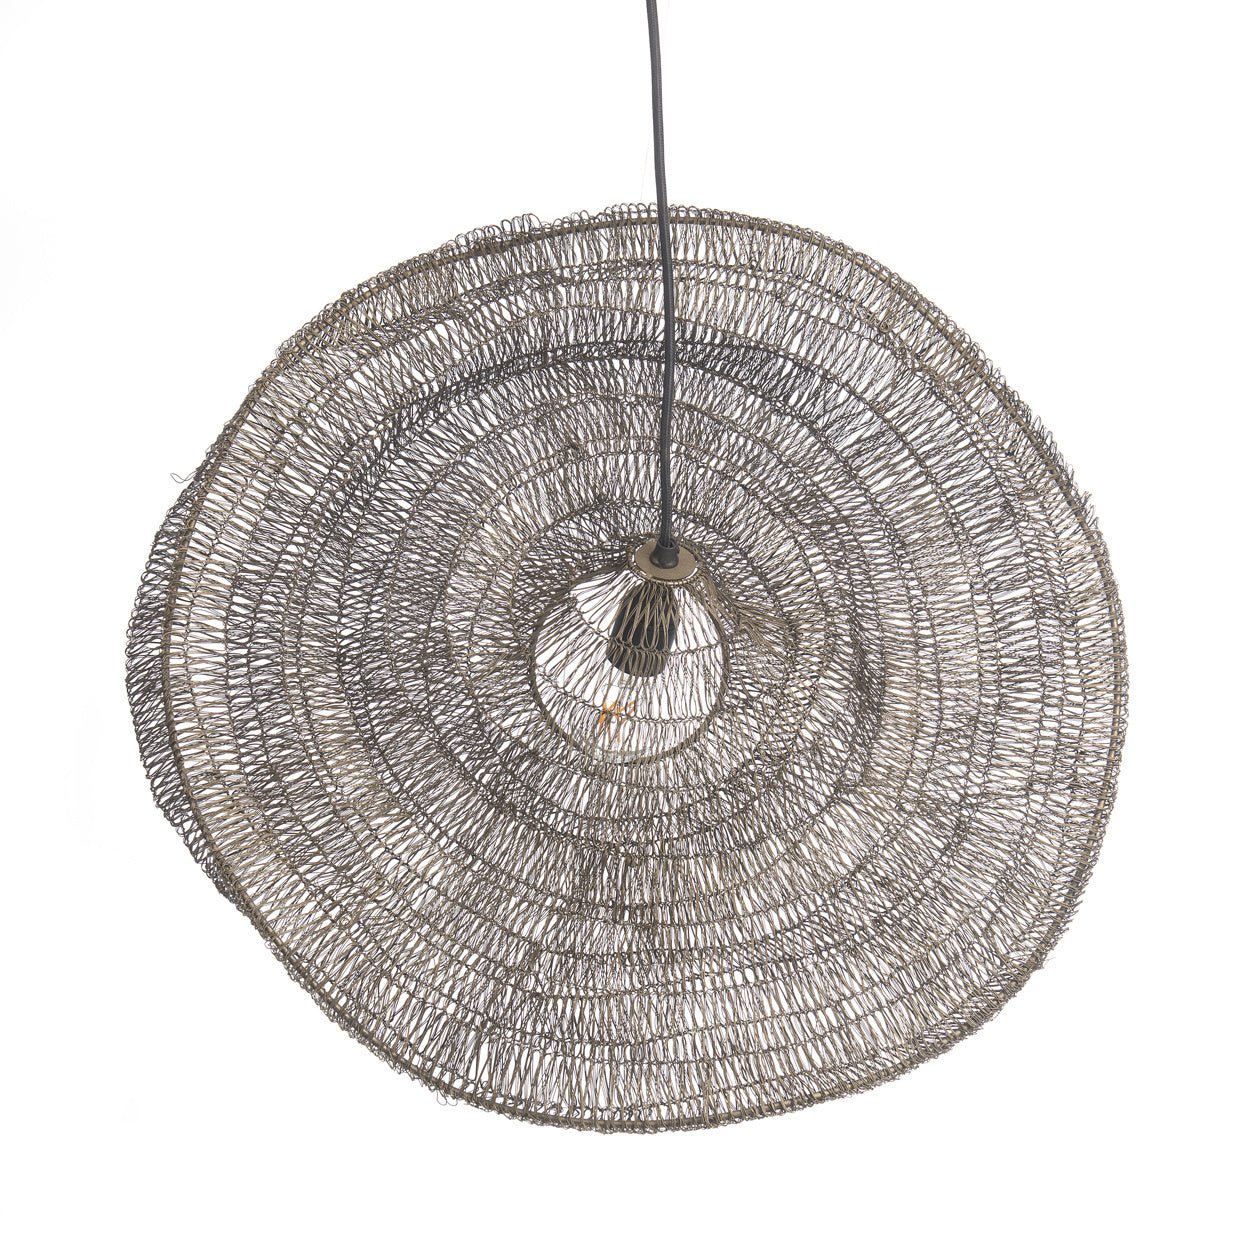 The Oyster Hanging Lamp - Mässing - L